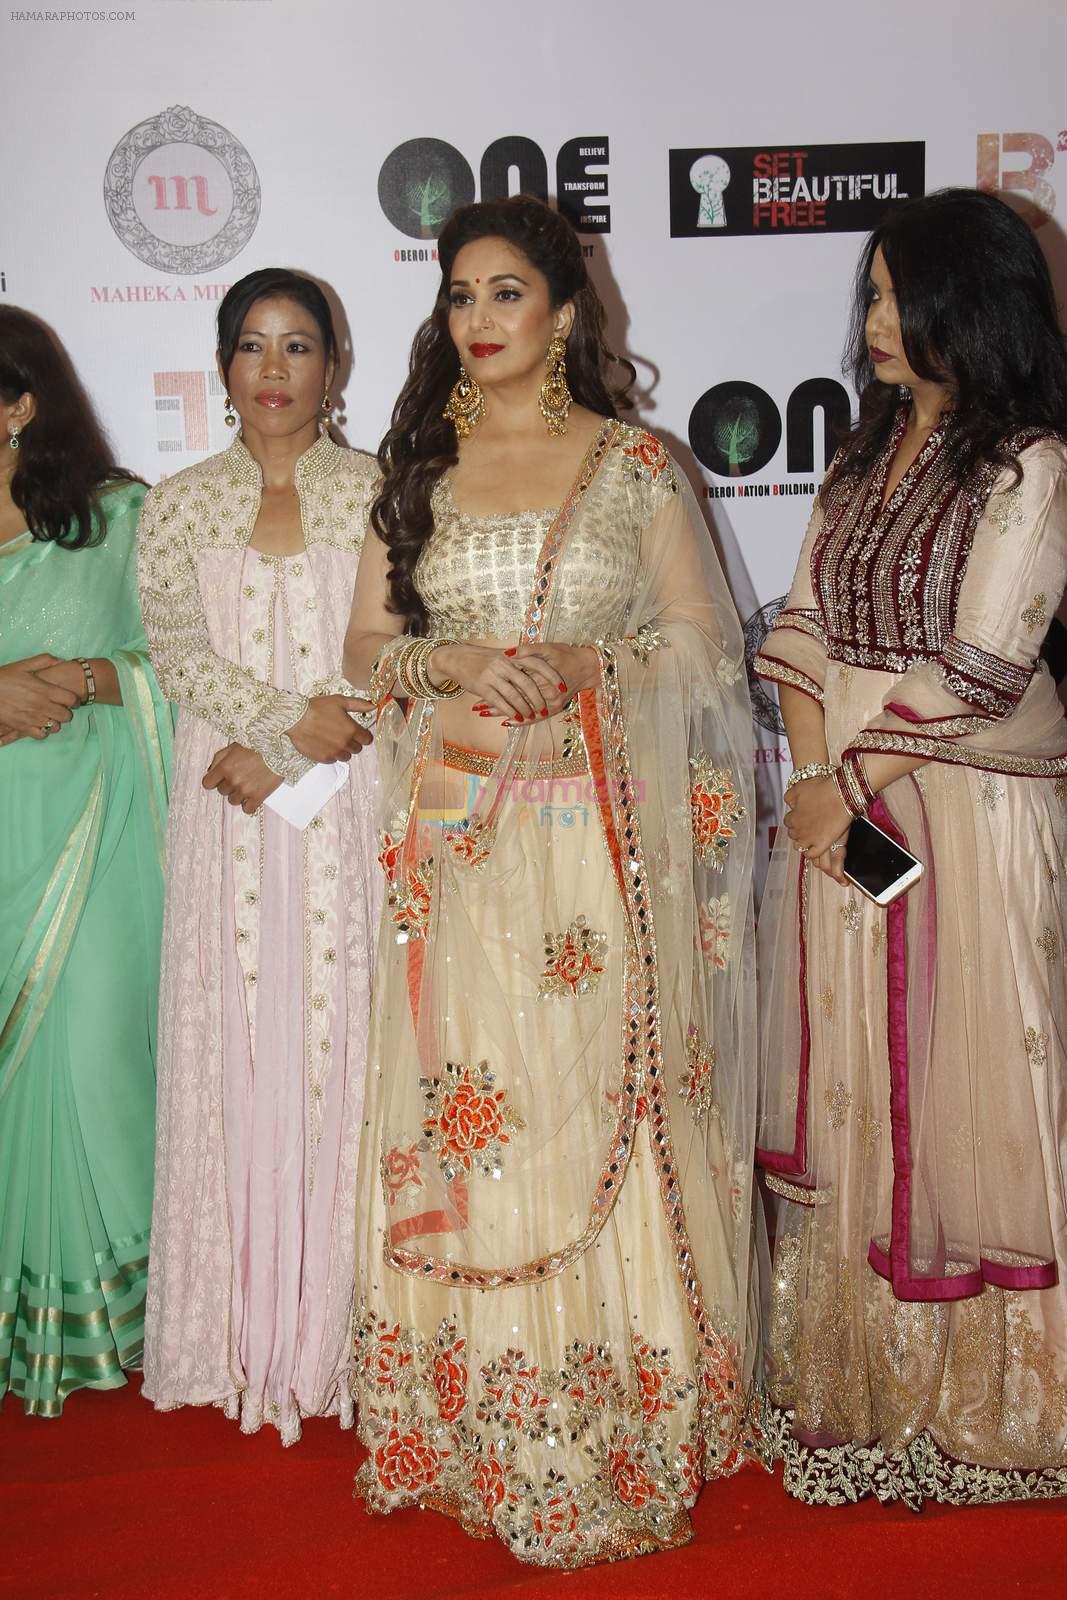 Madhuri Dixit at vivek oberoi's charity event in Mumbai on 29th Aug 2015